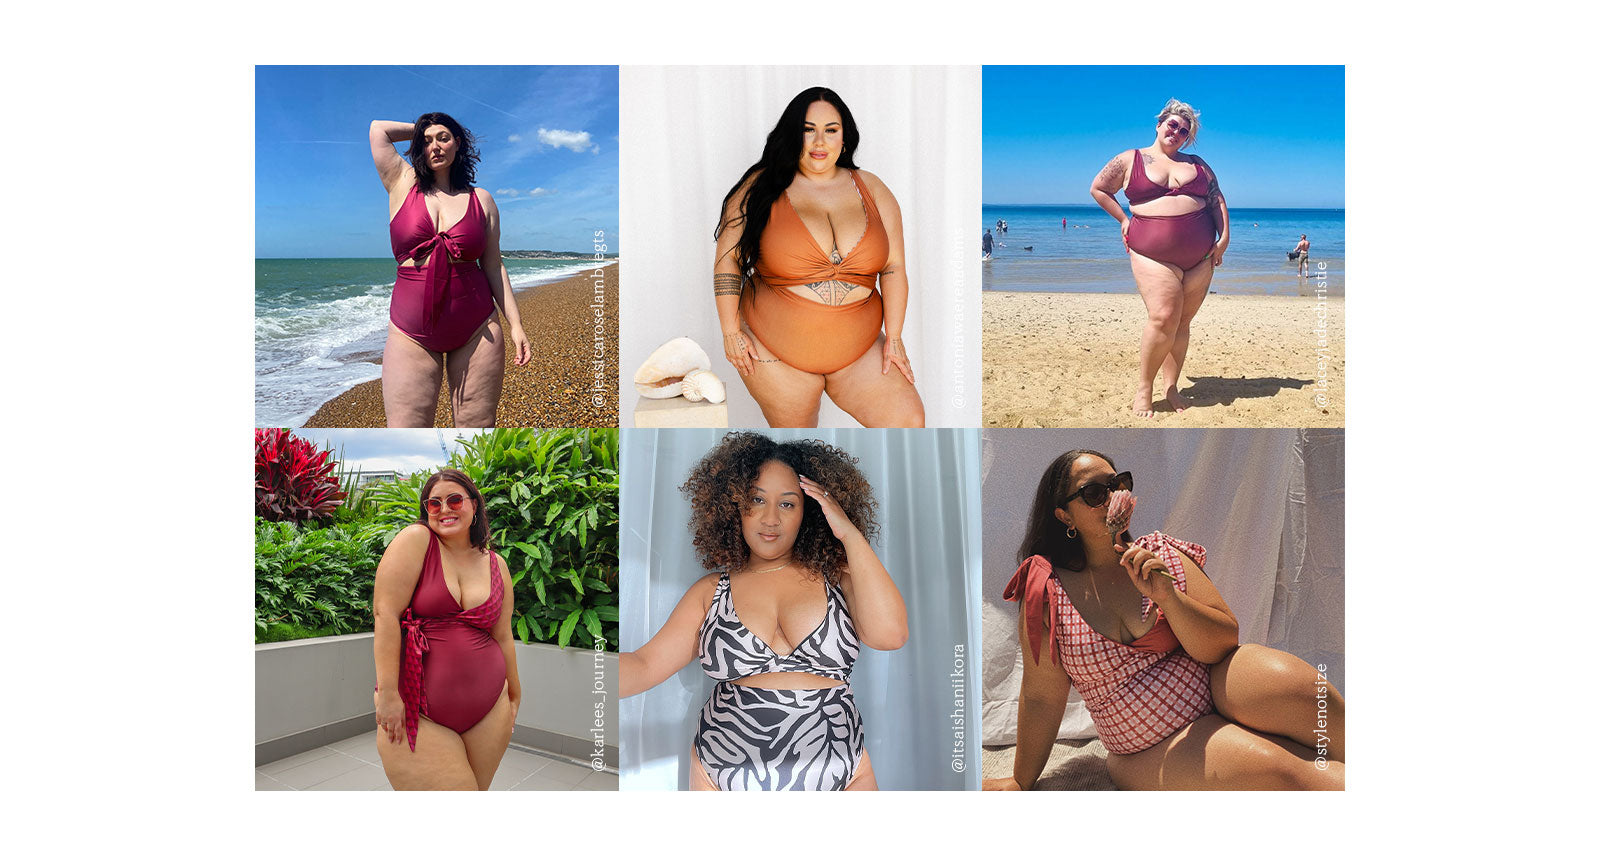 Images of our beautiful plus size community